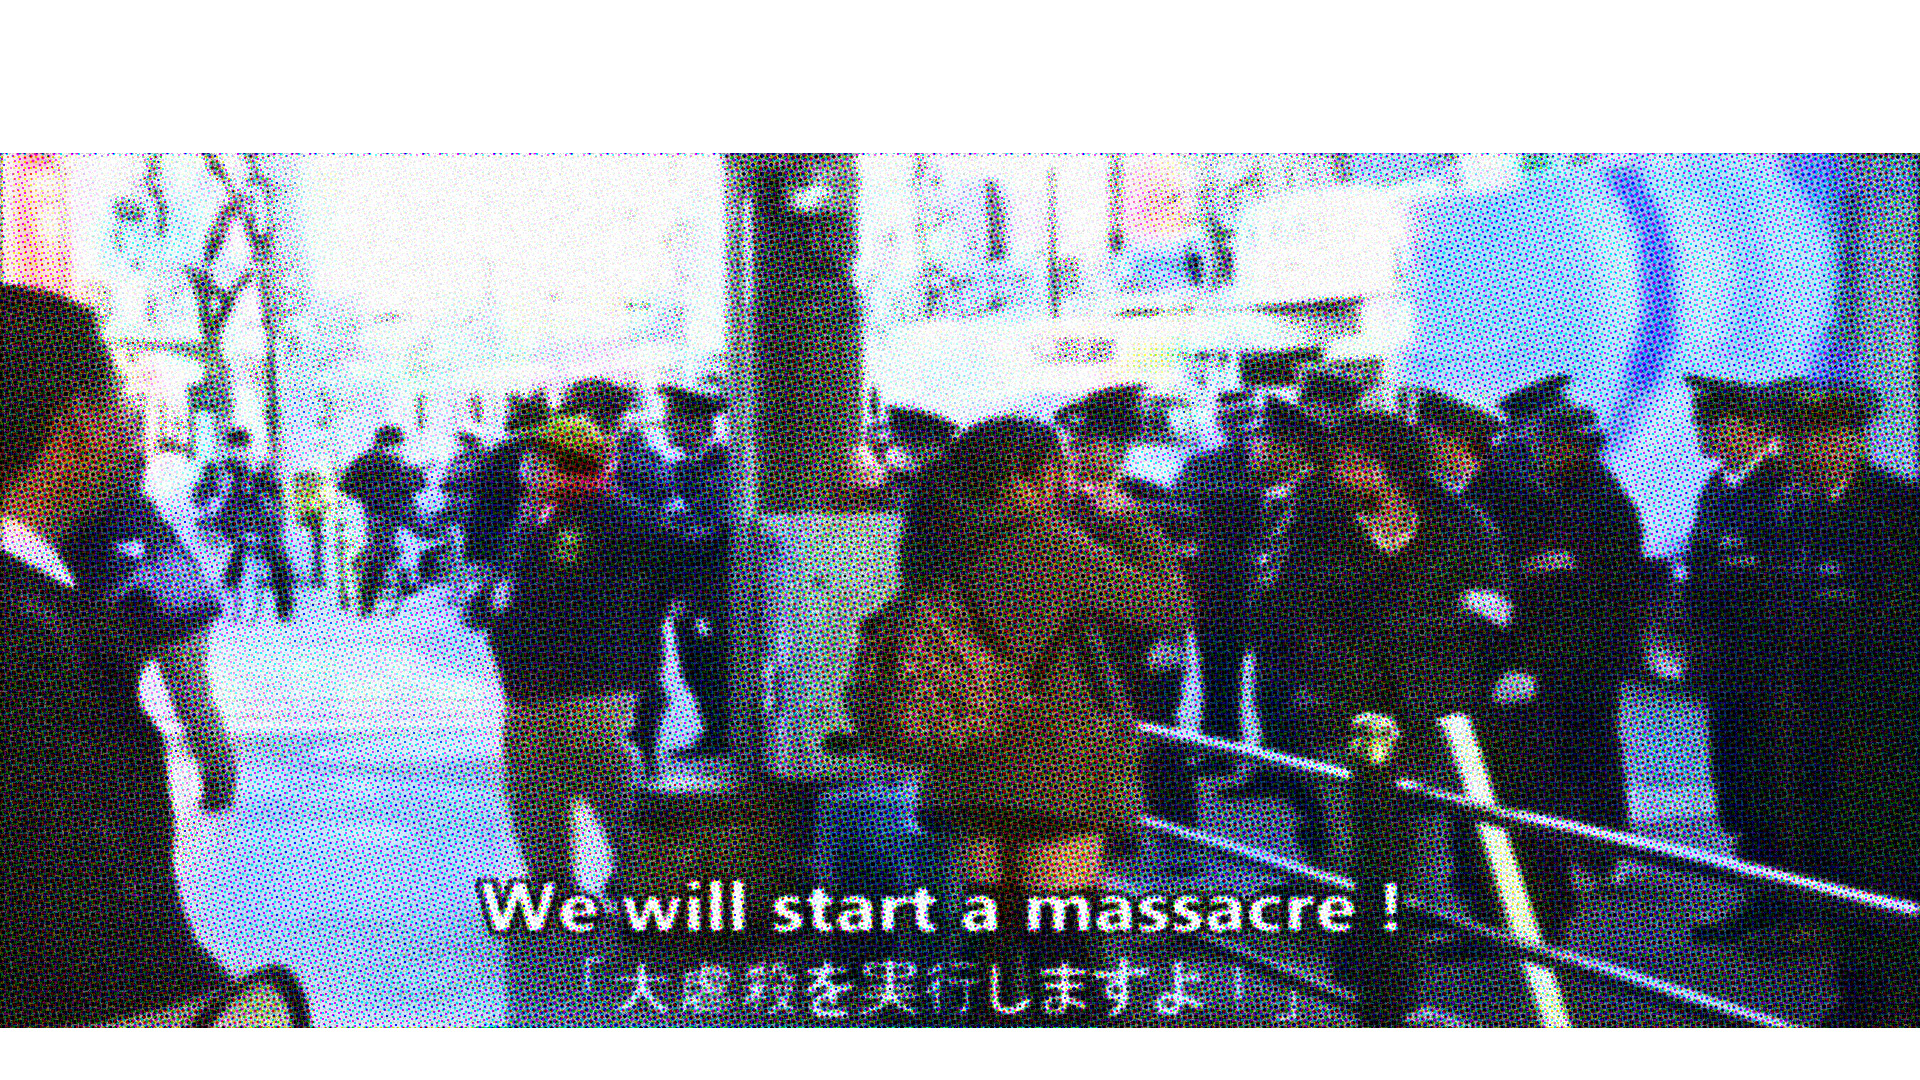 Footage that shocked the world: This video of a junior high school girl calling for a Nanking-style massacre of Koreans went viral online in 2013. She was taking part in a demonstration in the largely Korean enclave of Tsuruhashi in Osaka, standing before a number of police officers who did nothing to stop her. | KYODO